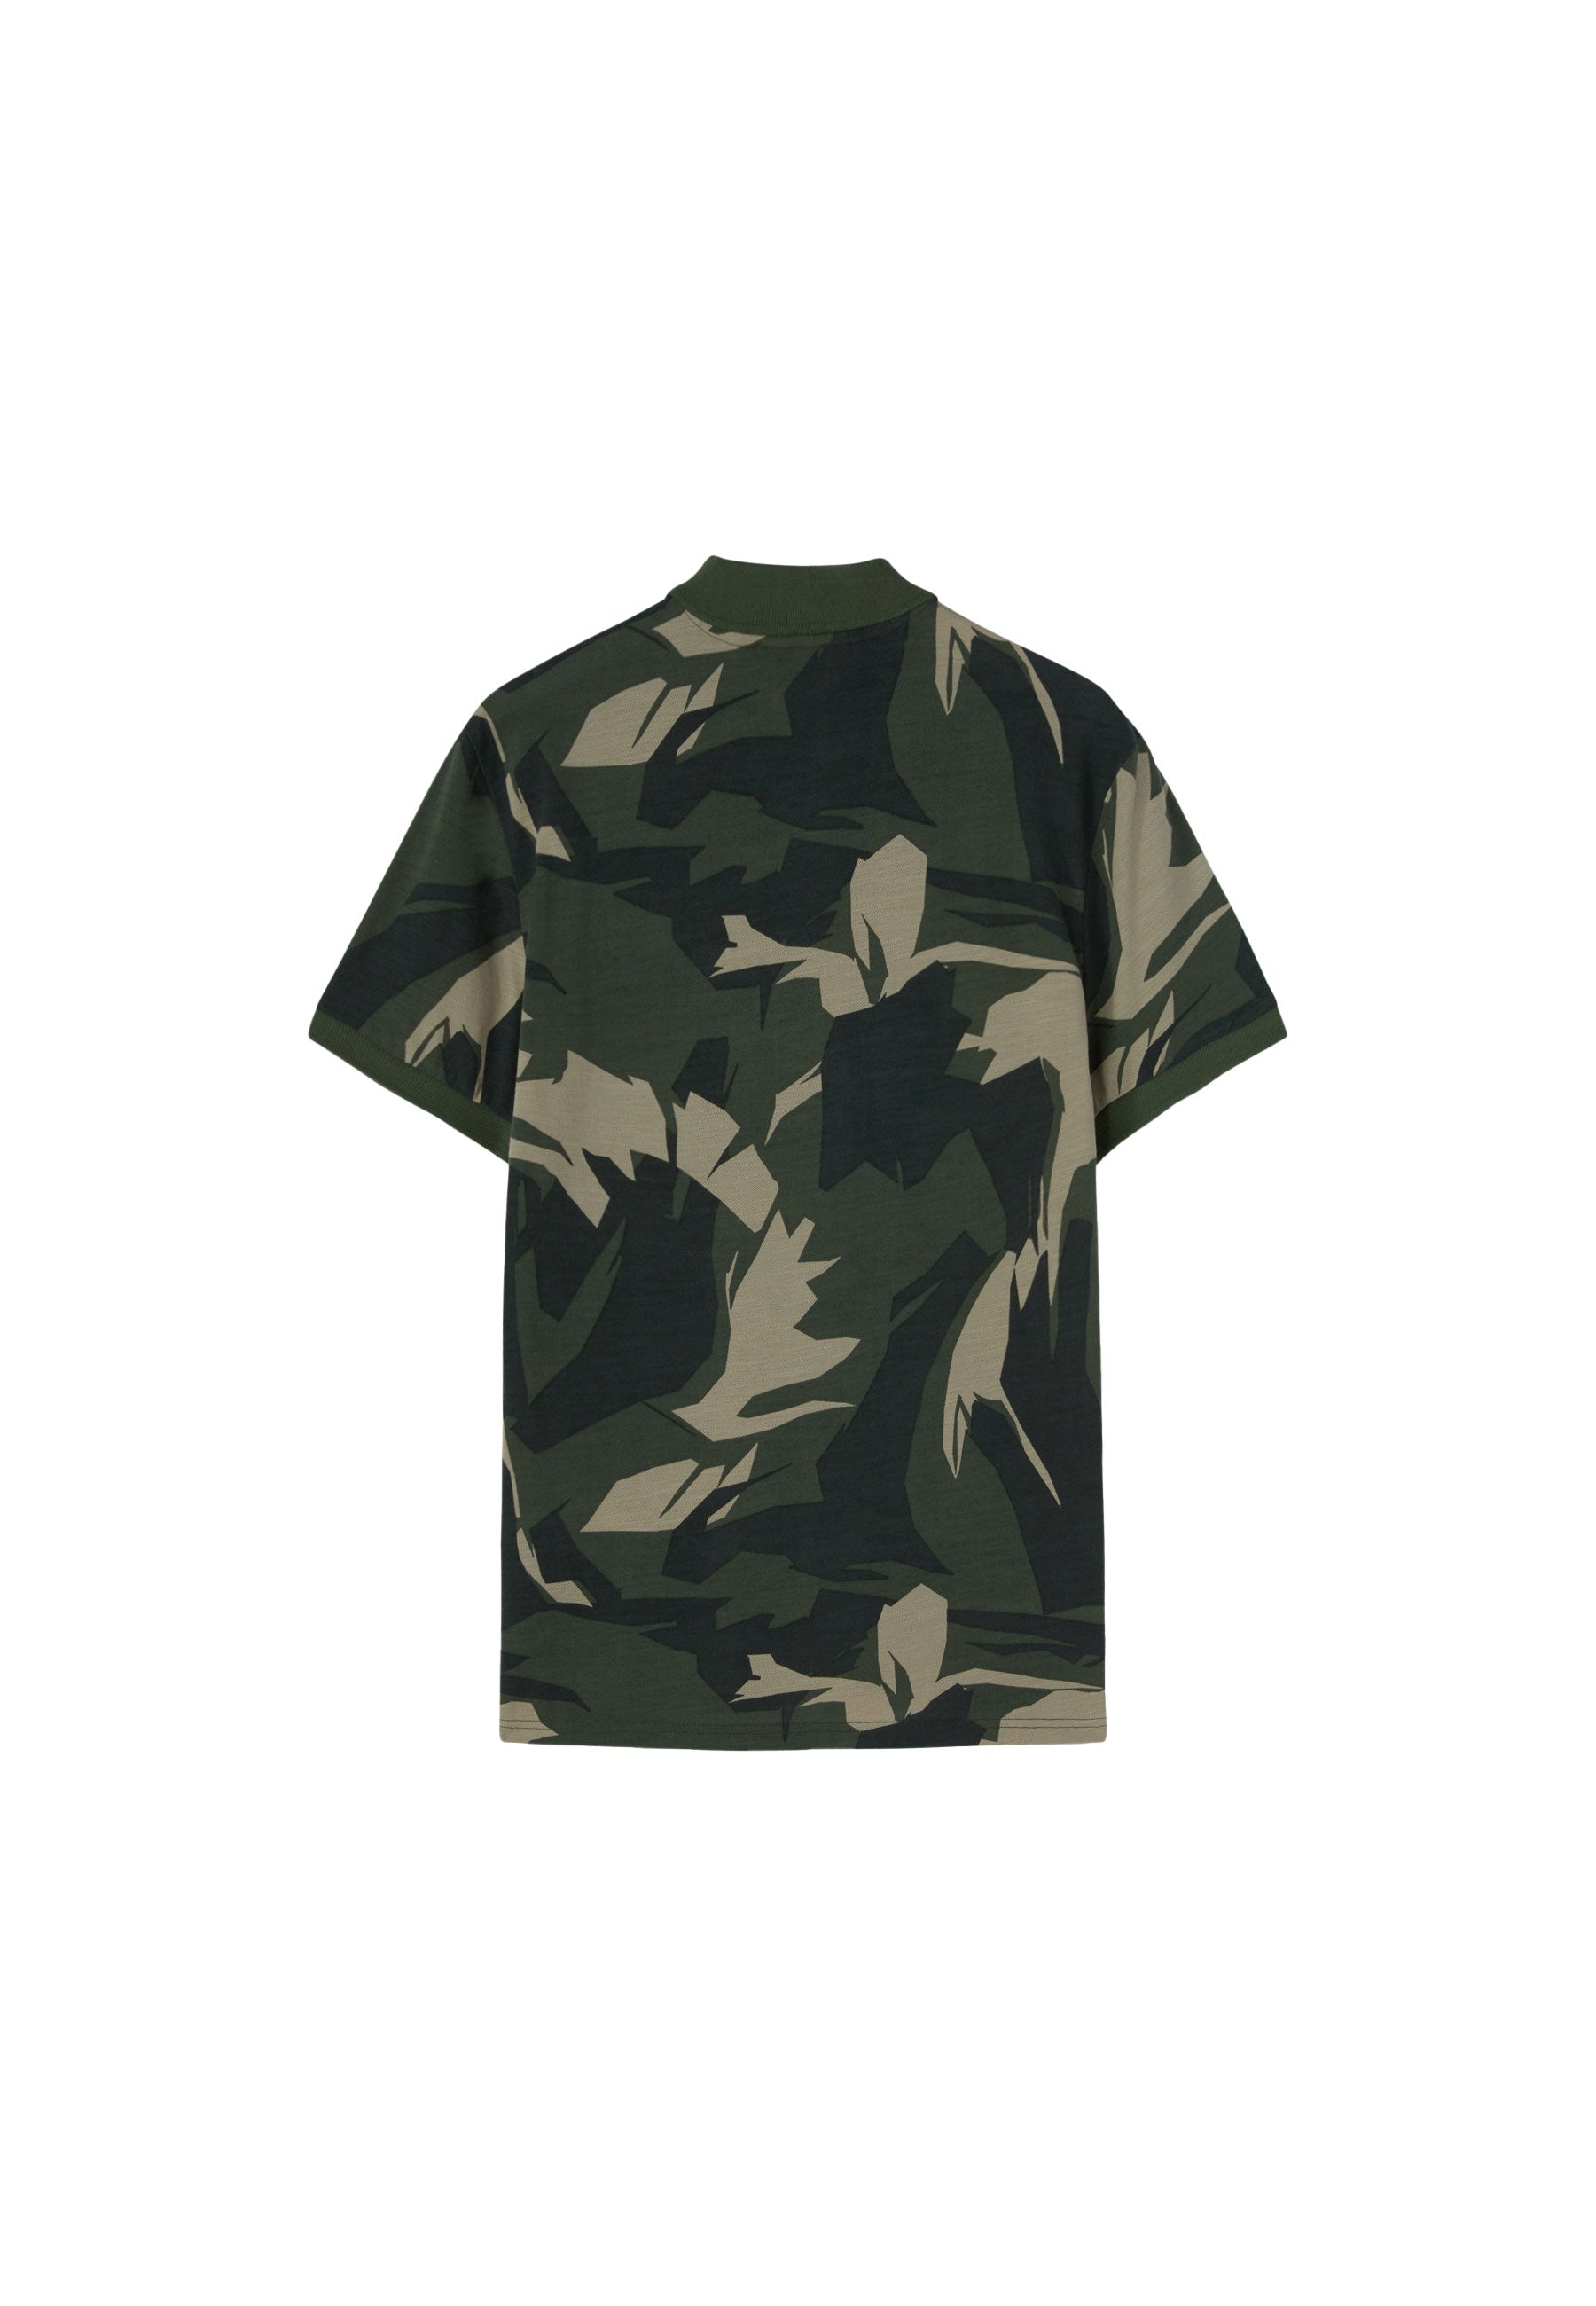 Ralph/S Camouflage Polo in Camouflage Green Polos GAS   